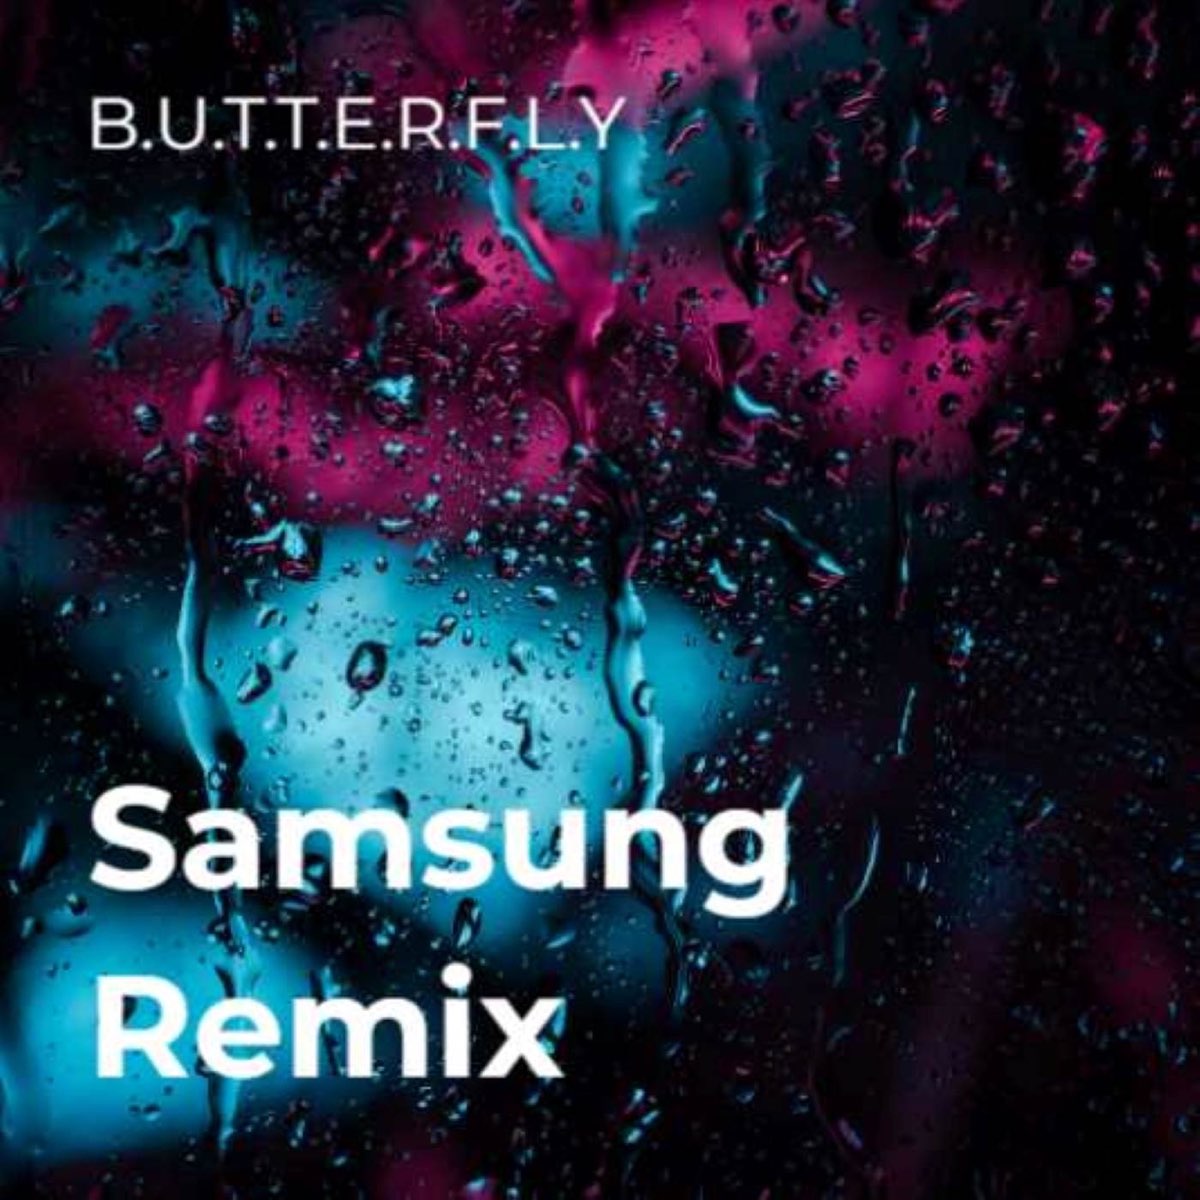 Samsung Remix (Remix) - Single - Album by The Butterfly Group - Apple Music